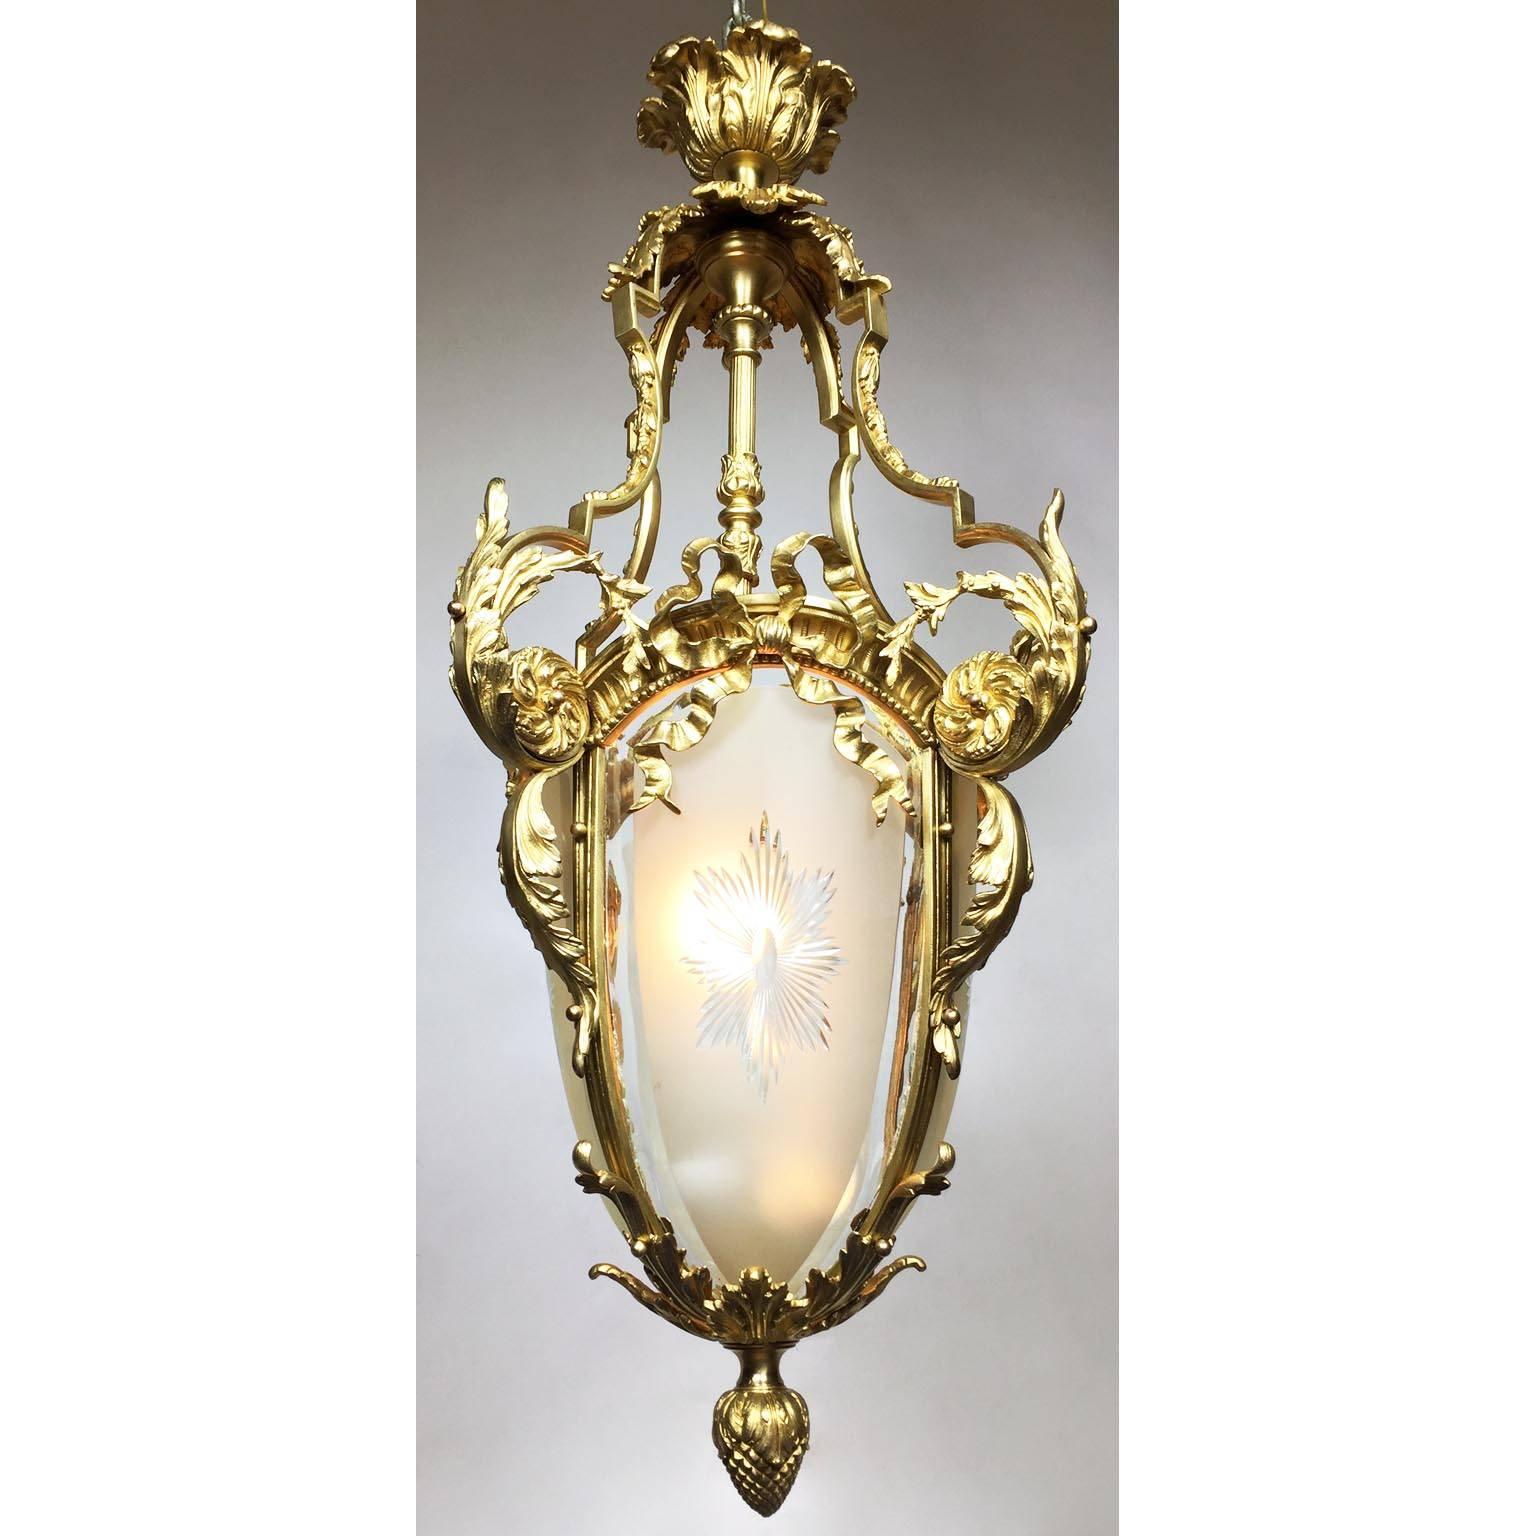 A very fine French 19th-20th century Louis XV style pear-shaped gilt bronze and diamond-cut-bent-glass lantern. The ovoid gilt bronze body with a single light, surmounted with three glass panels centered with a sunburst design. The scrolled gilt